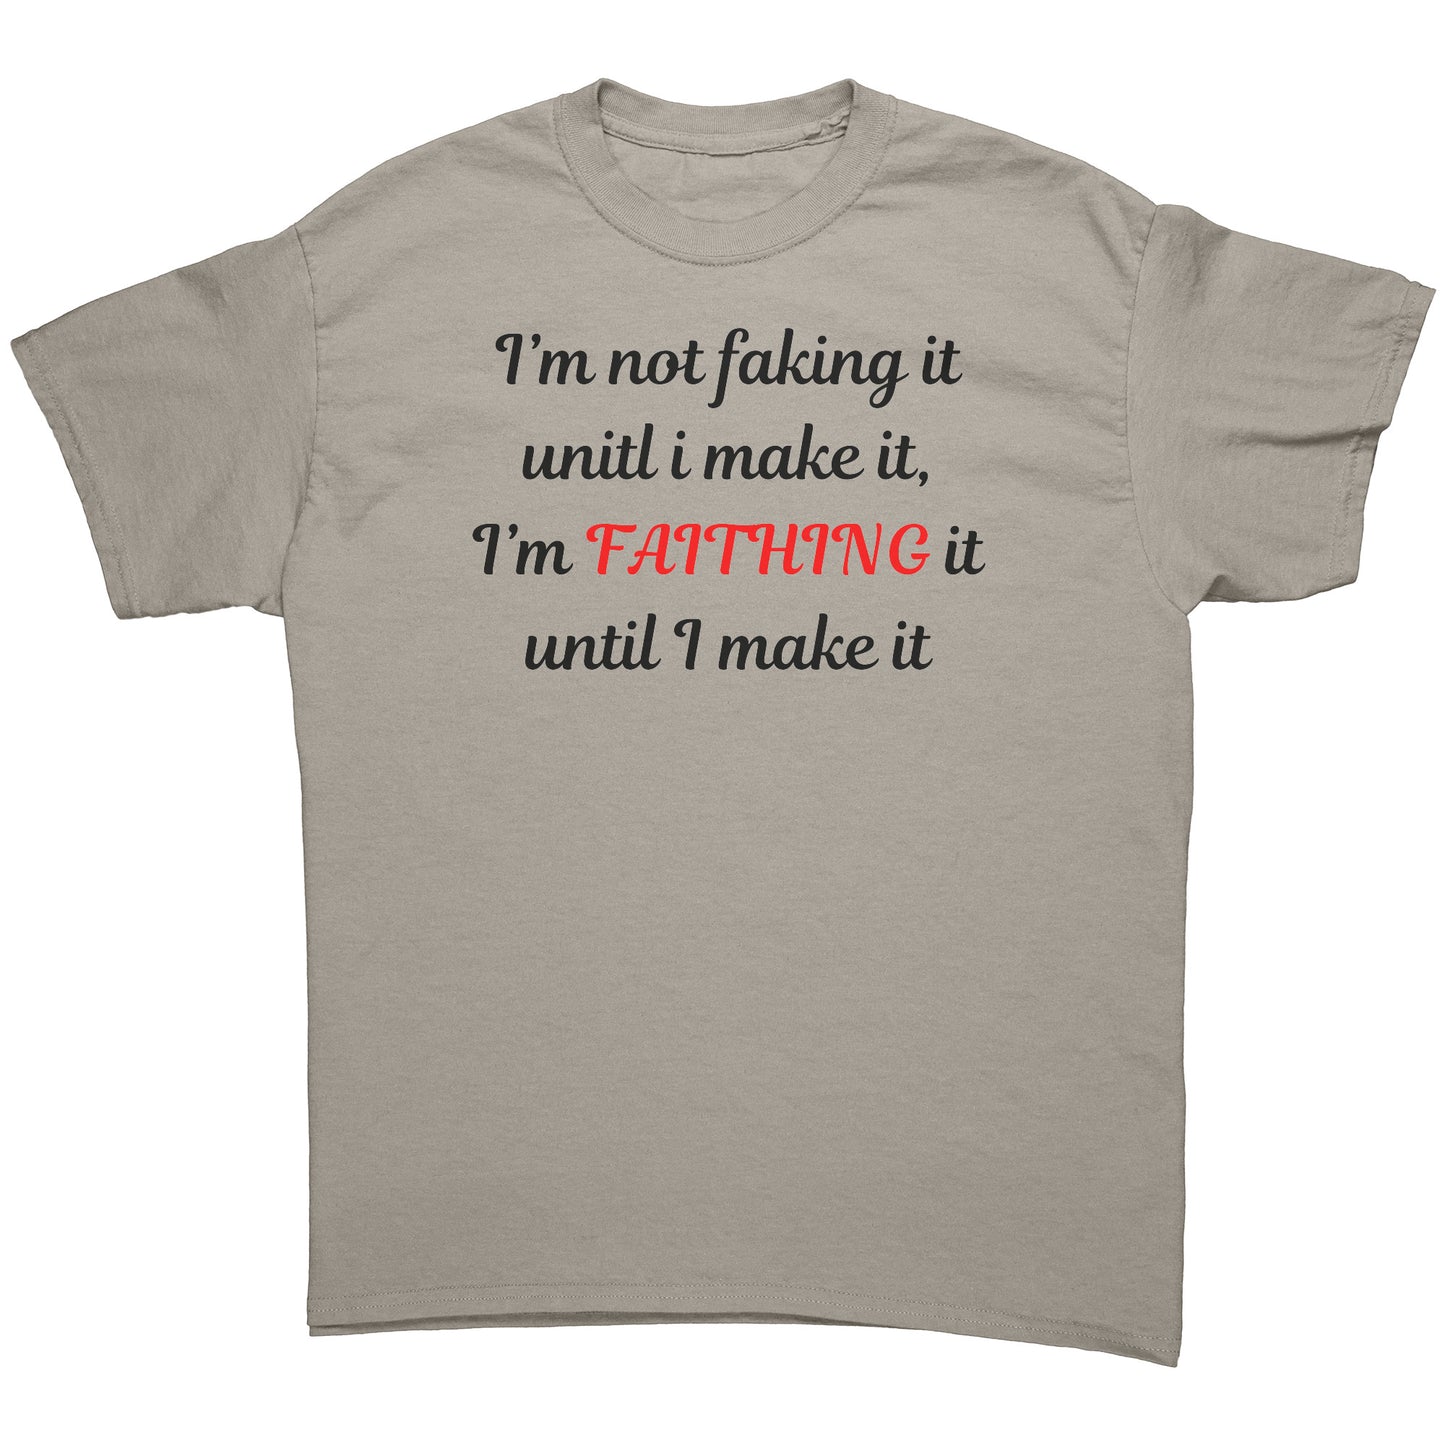 I'm not faking it Tee black lettering